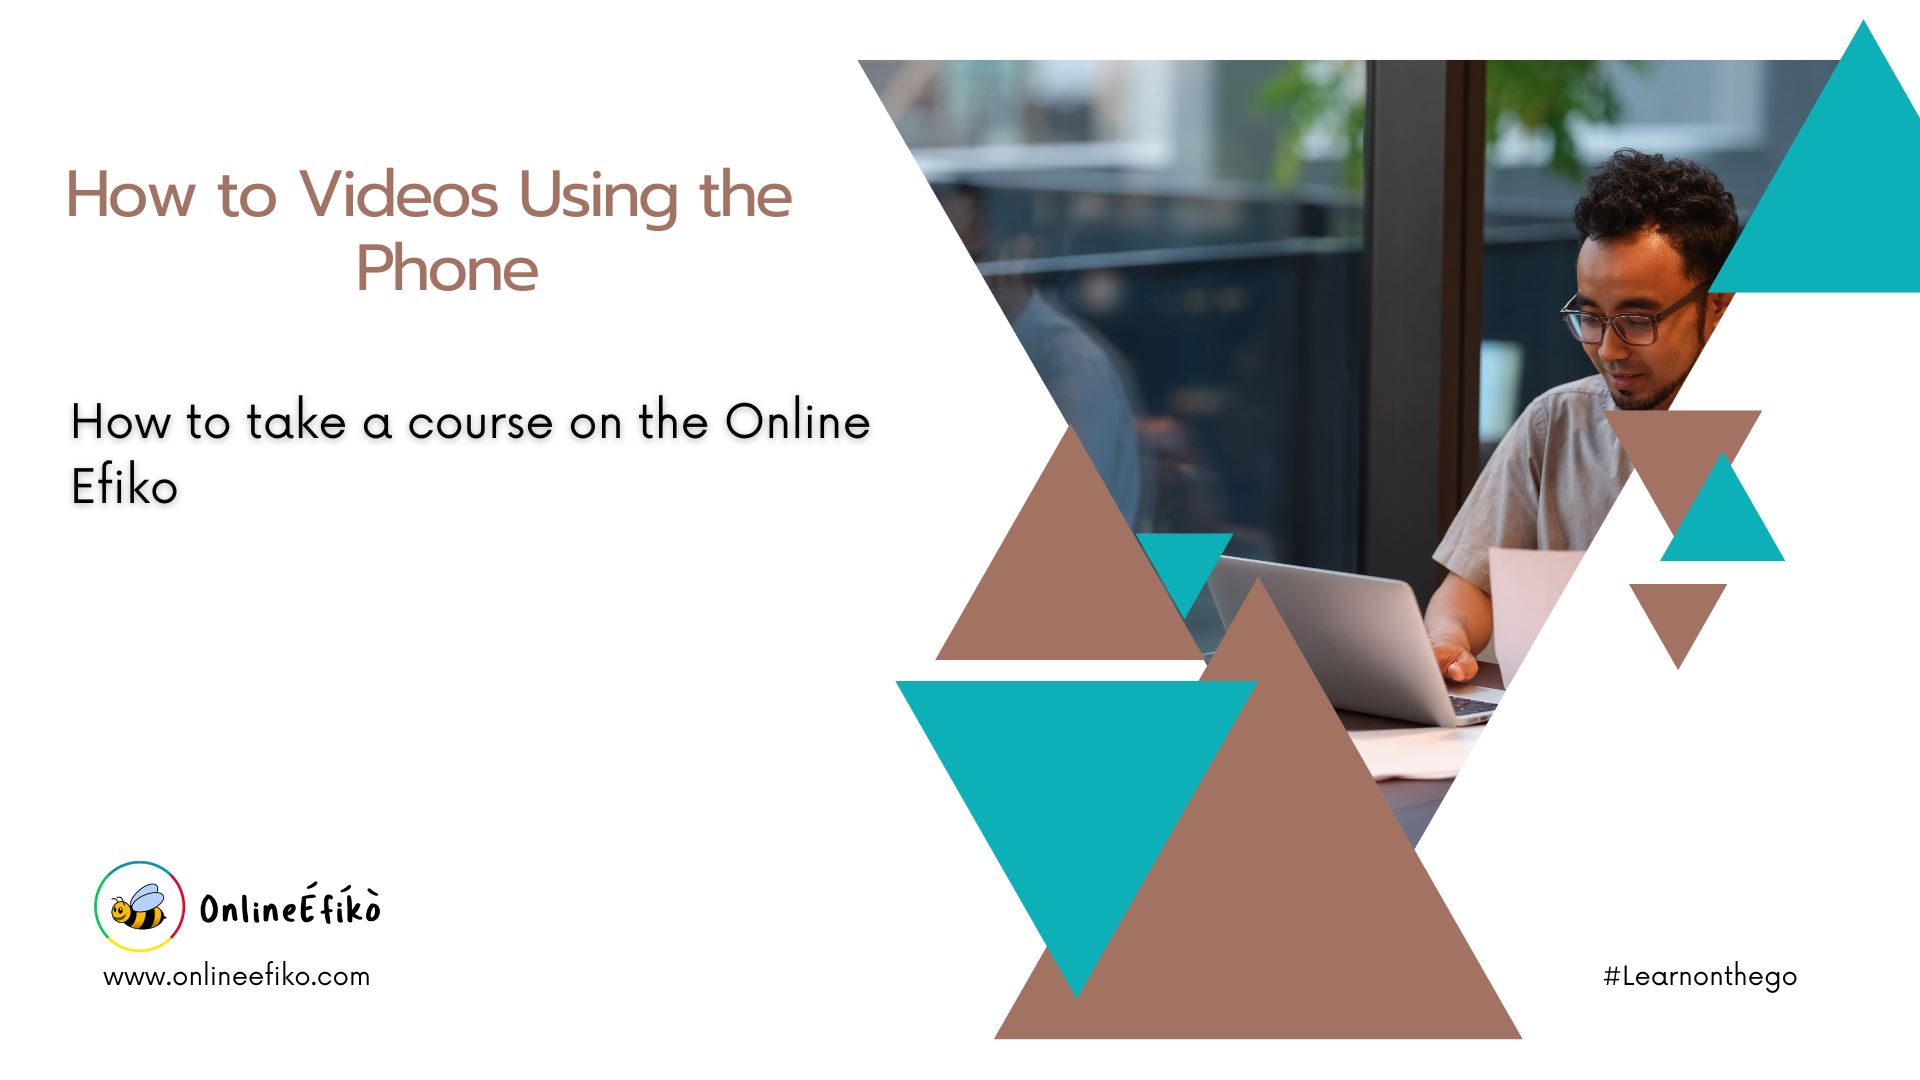 How to take a course on the Online Efiko